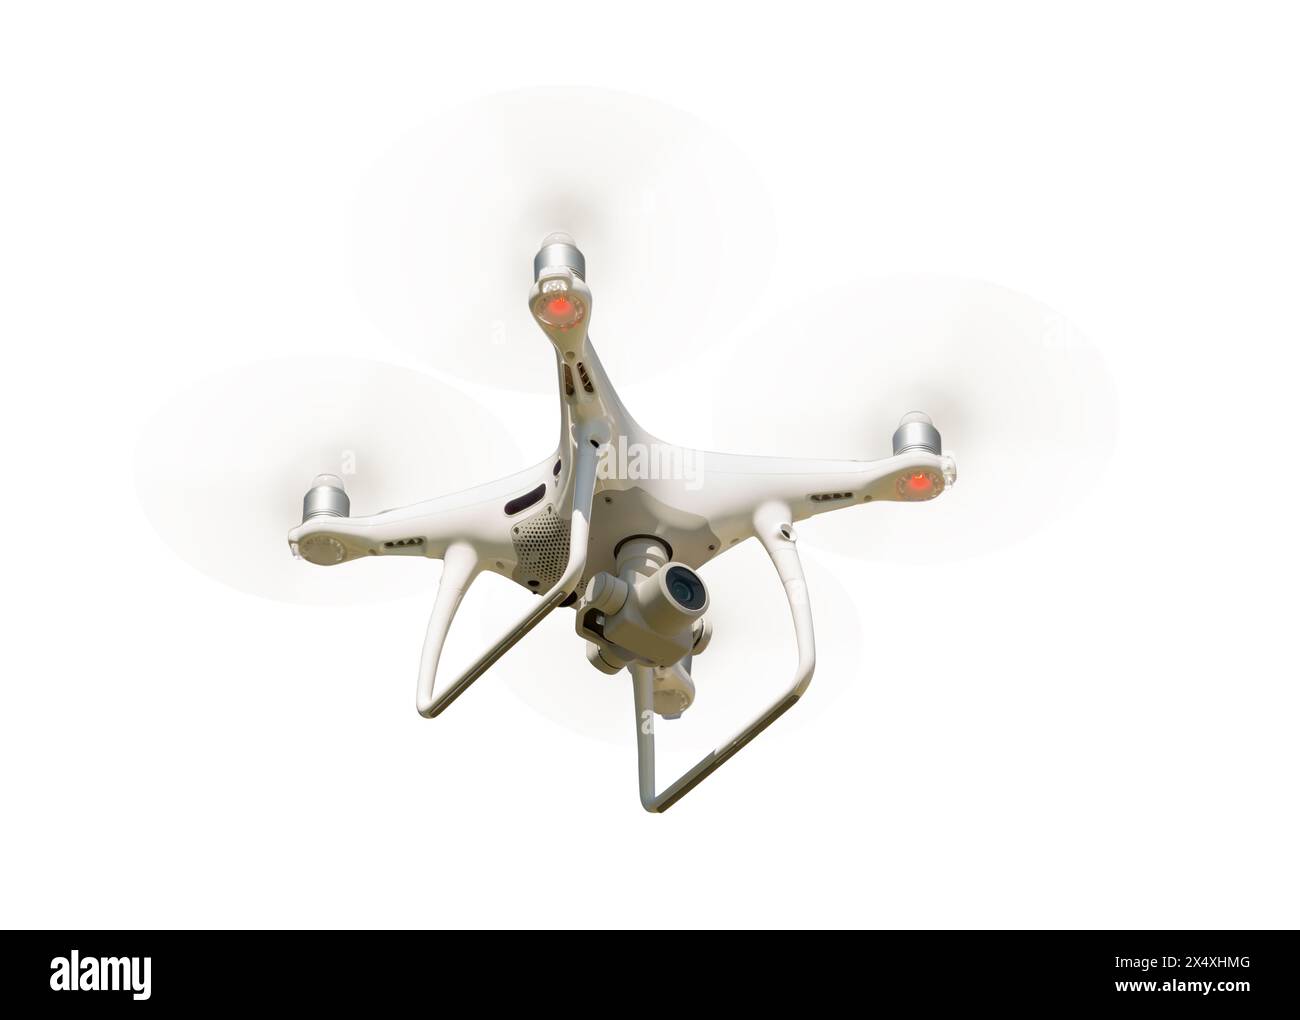 Unmanned Aircraft System (UAV) Quadcopter Drone In The Air Isolated on a White Background. Stock Photo